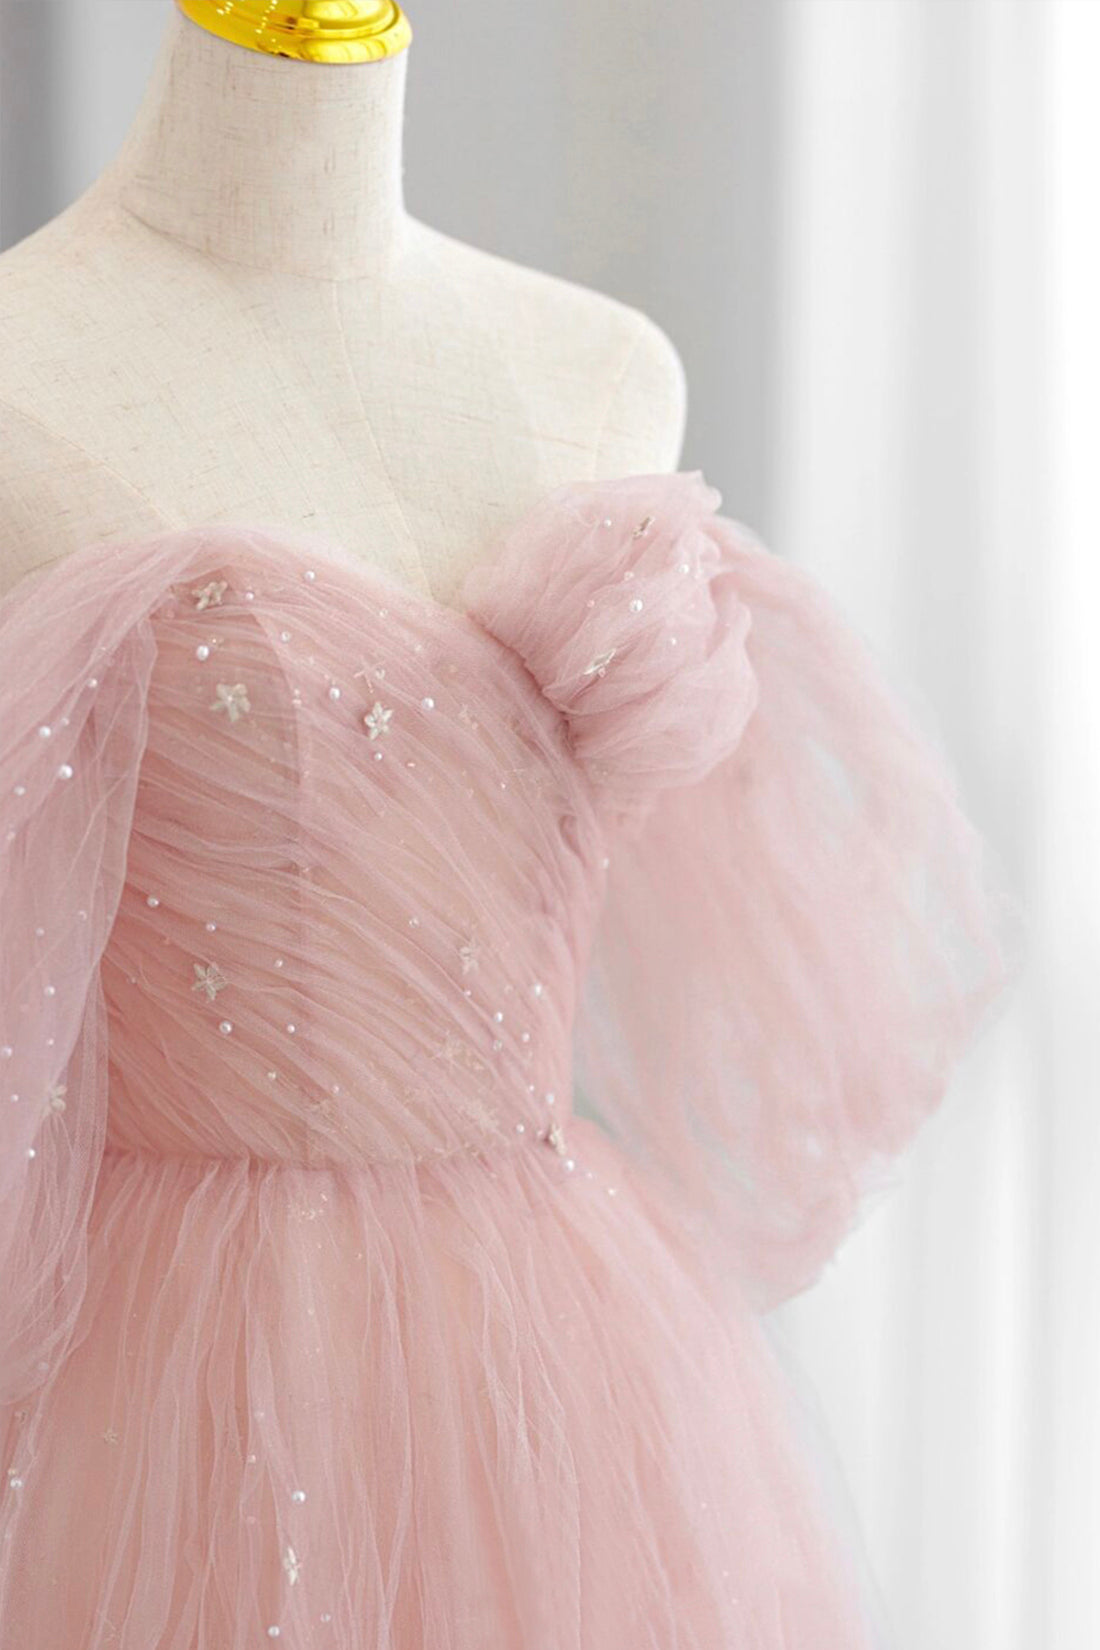 Pink Tulle Floor Length Prom Dress, Cute A-Line Evening Party Dress